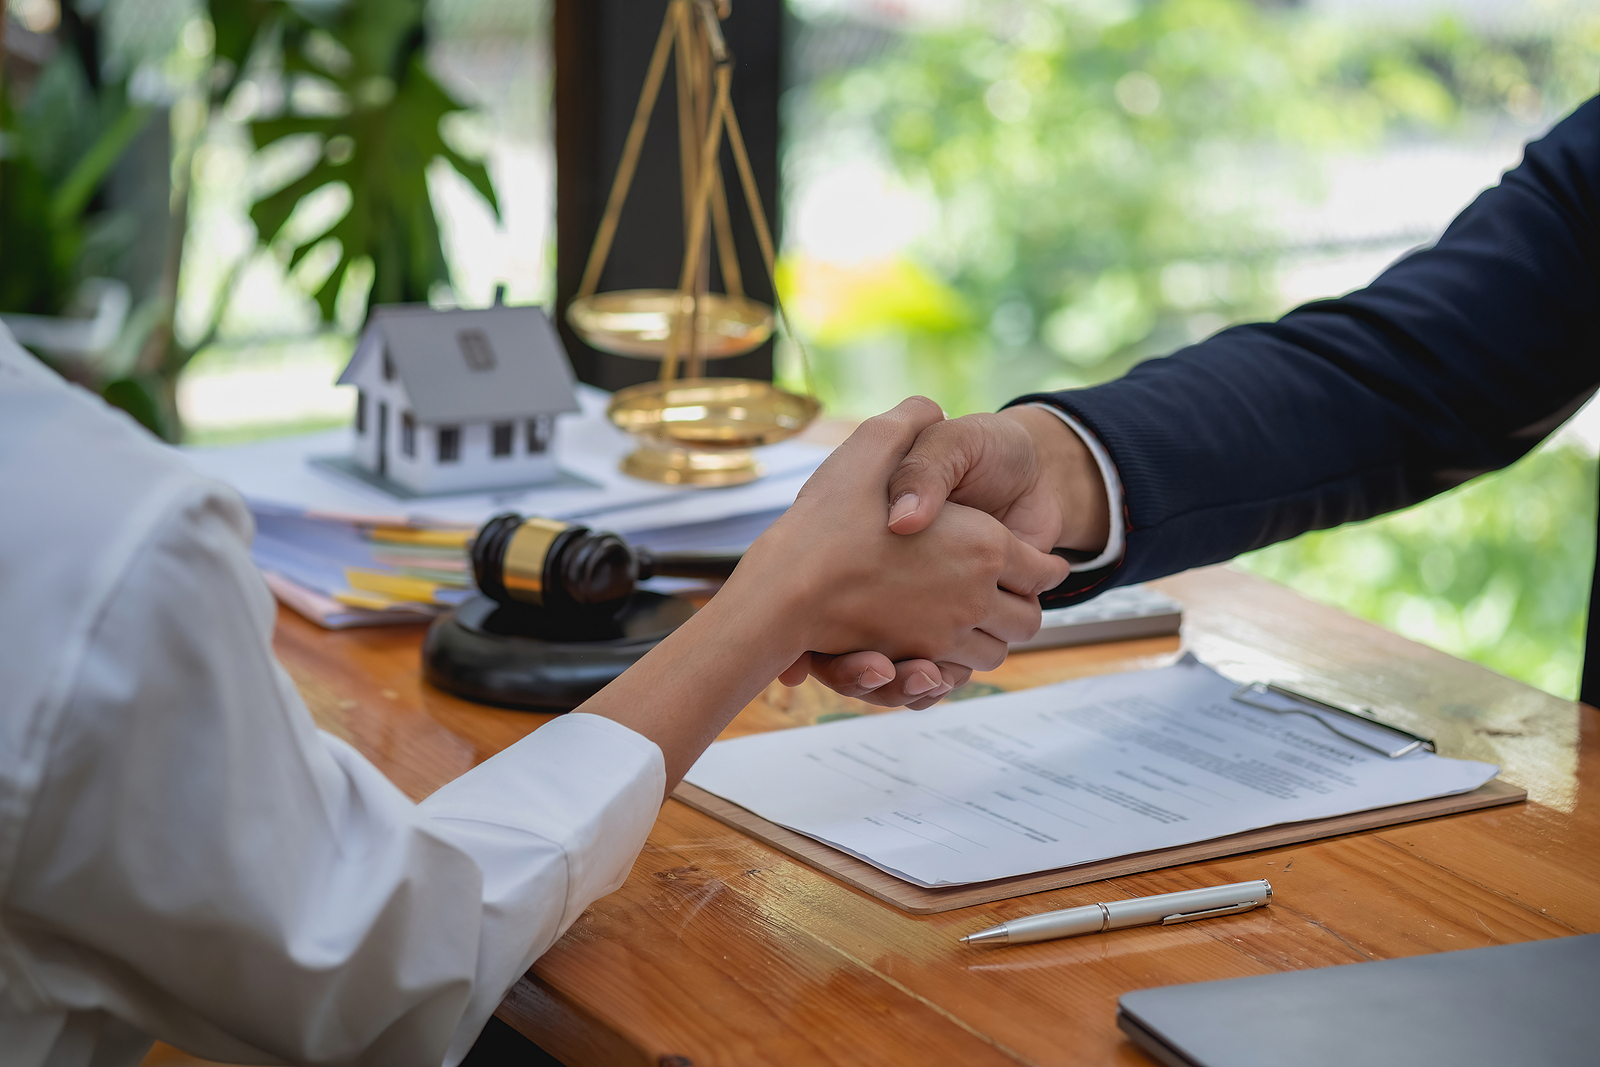 When Should I Contact a Workers’ Compensation Lawyer?